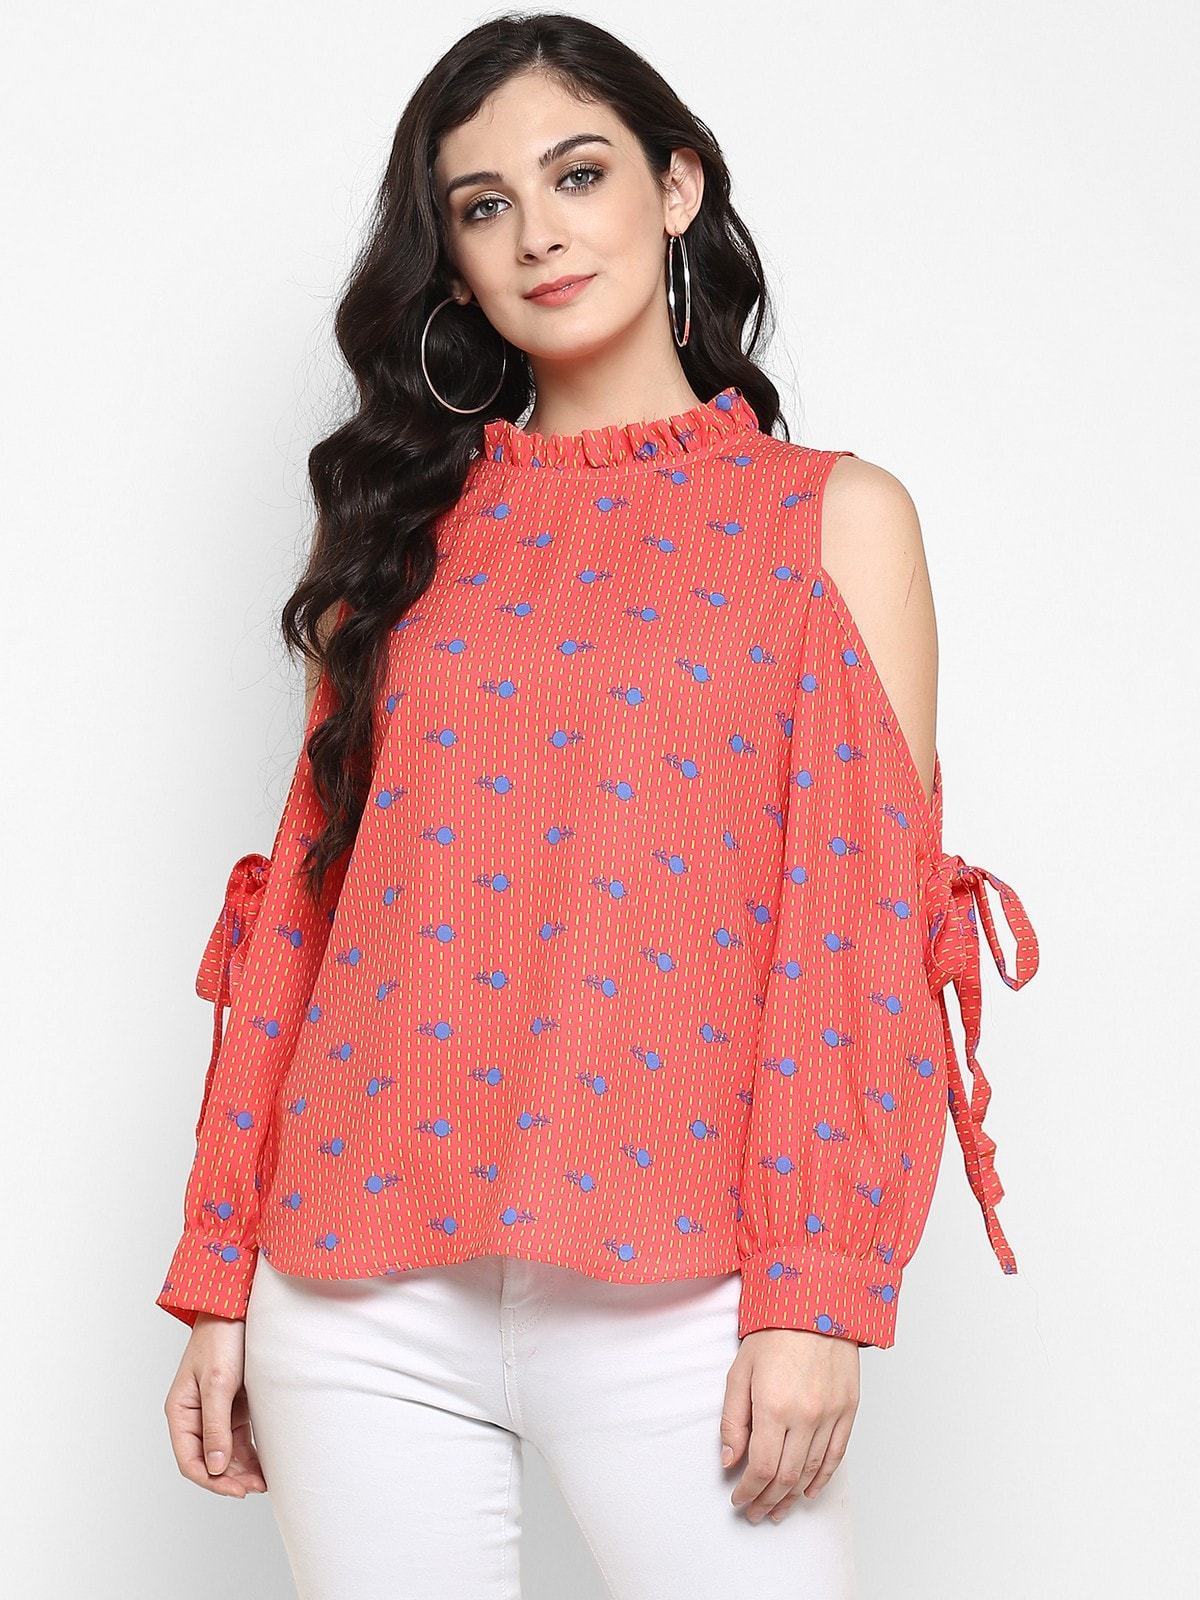 Women's Printed Cold Shoulder Ruffle Top - Pannkh